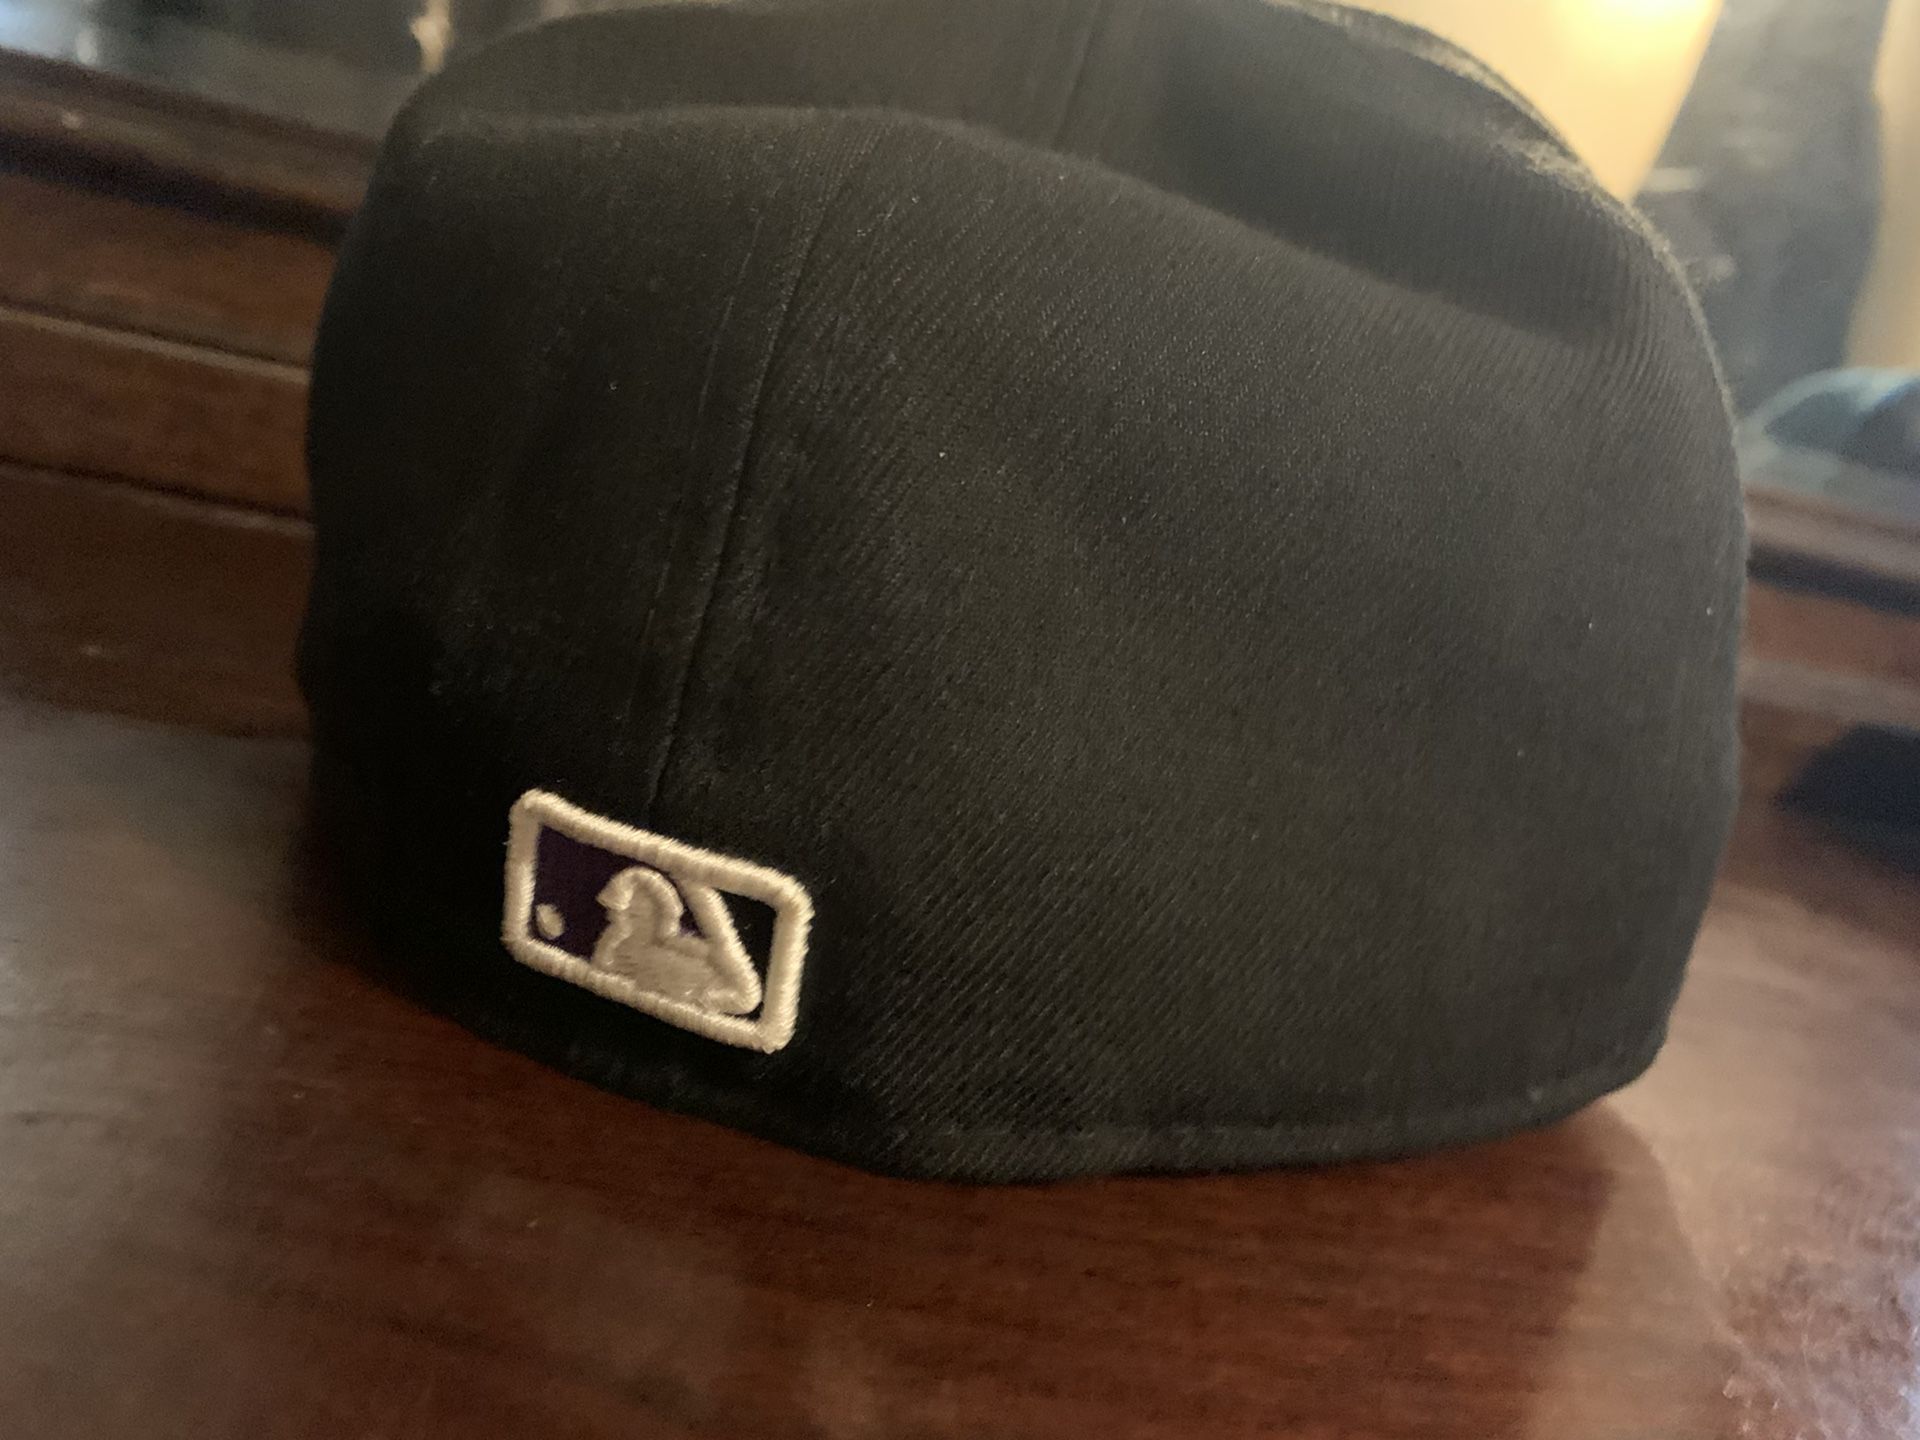 Behold: The Rockies held a Mullet Cap giveaway at Coors Field, and the  Giants' booth got into it